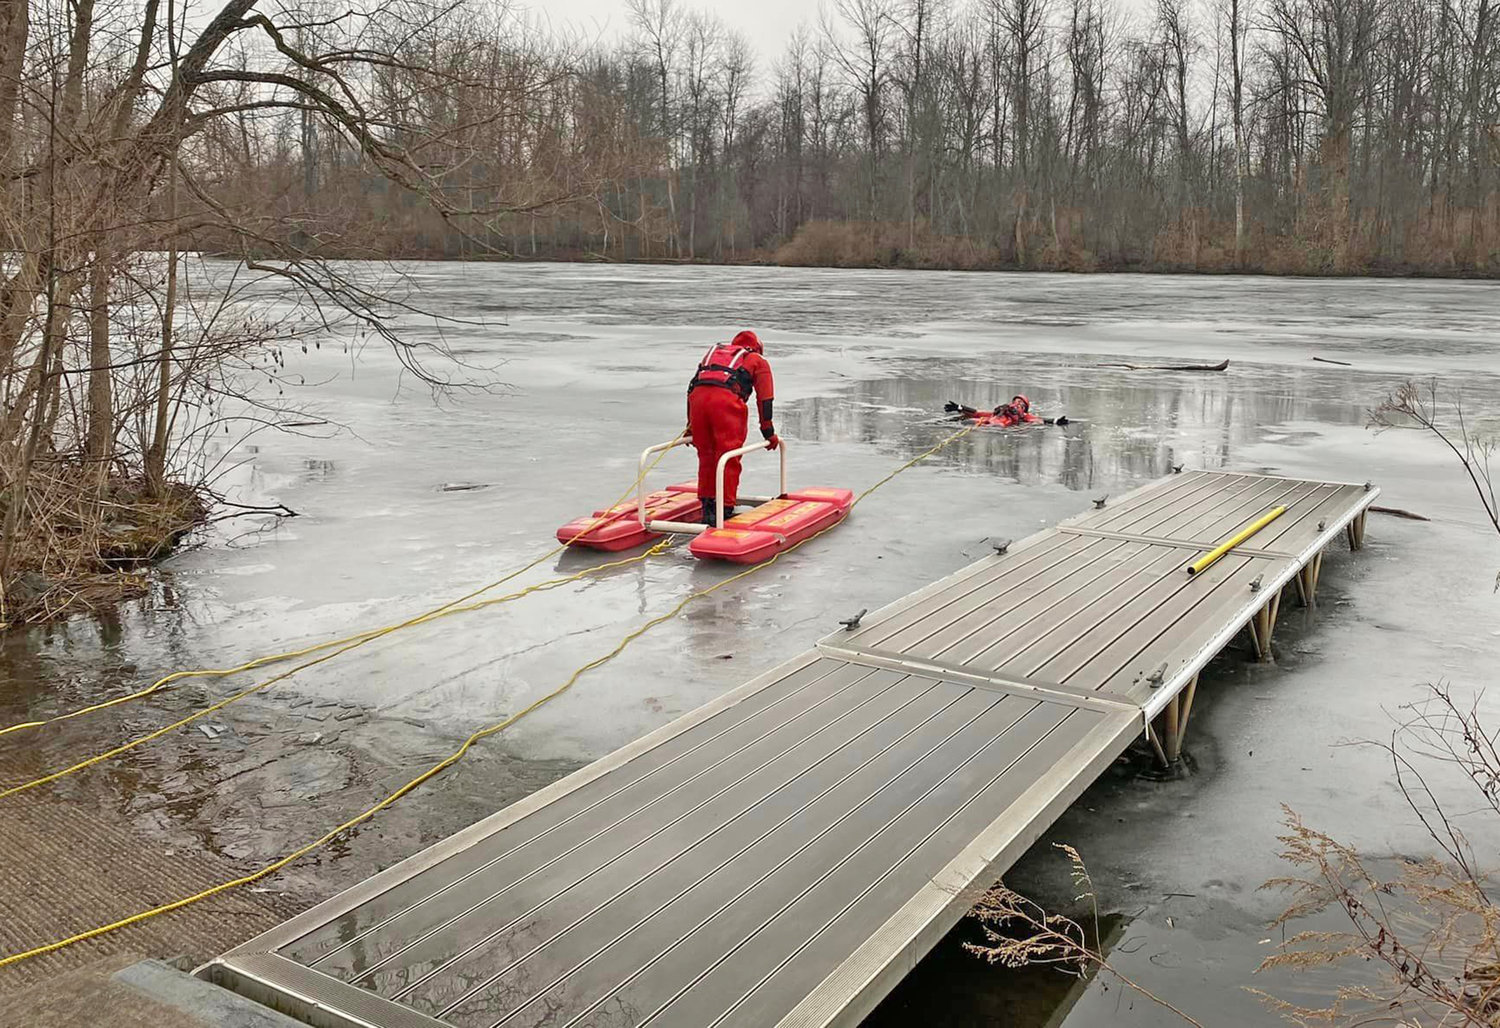 Rome firefighters clad in protective suits practice icy rescues on the Barge Canal Tuesday afternoon. With one trainee in the water, another rides the ice water rescue sled out to save the day.